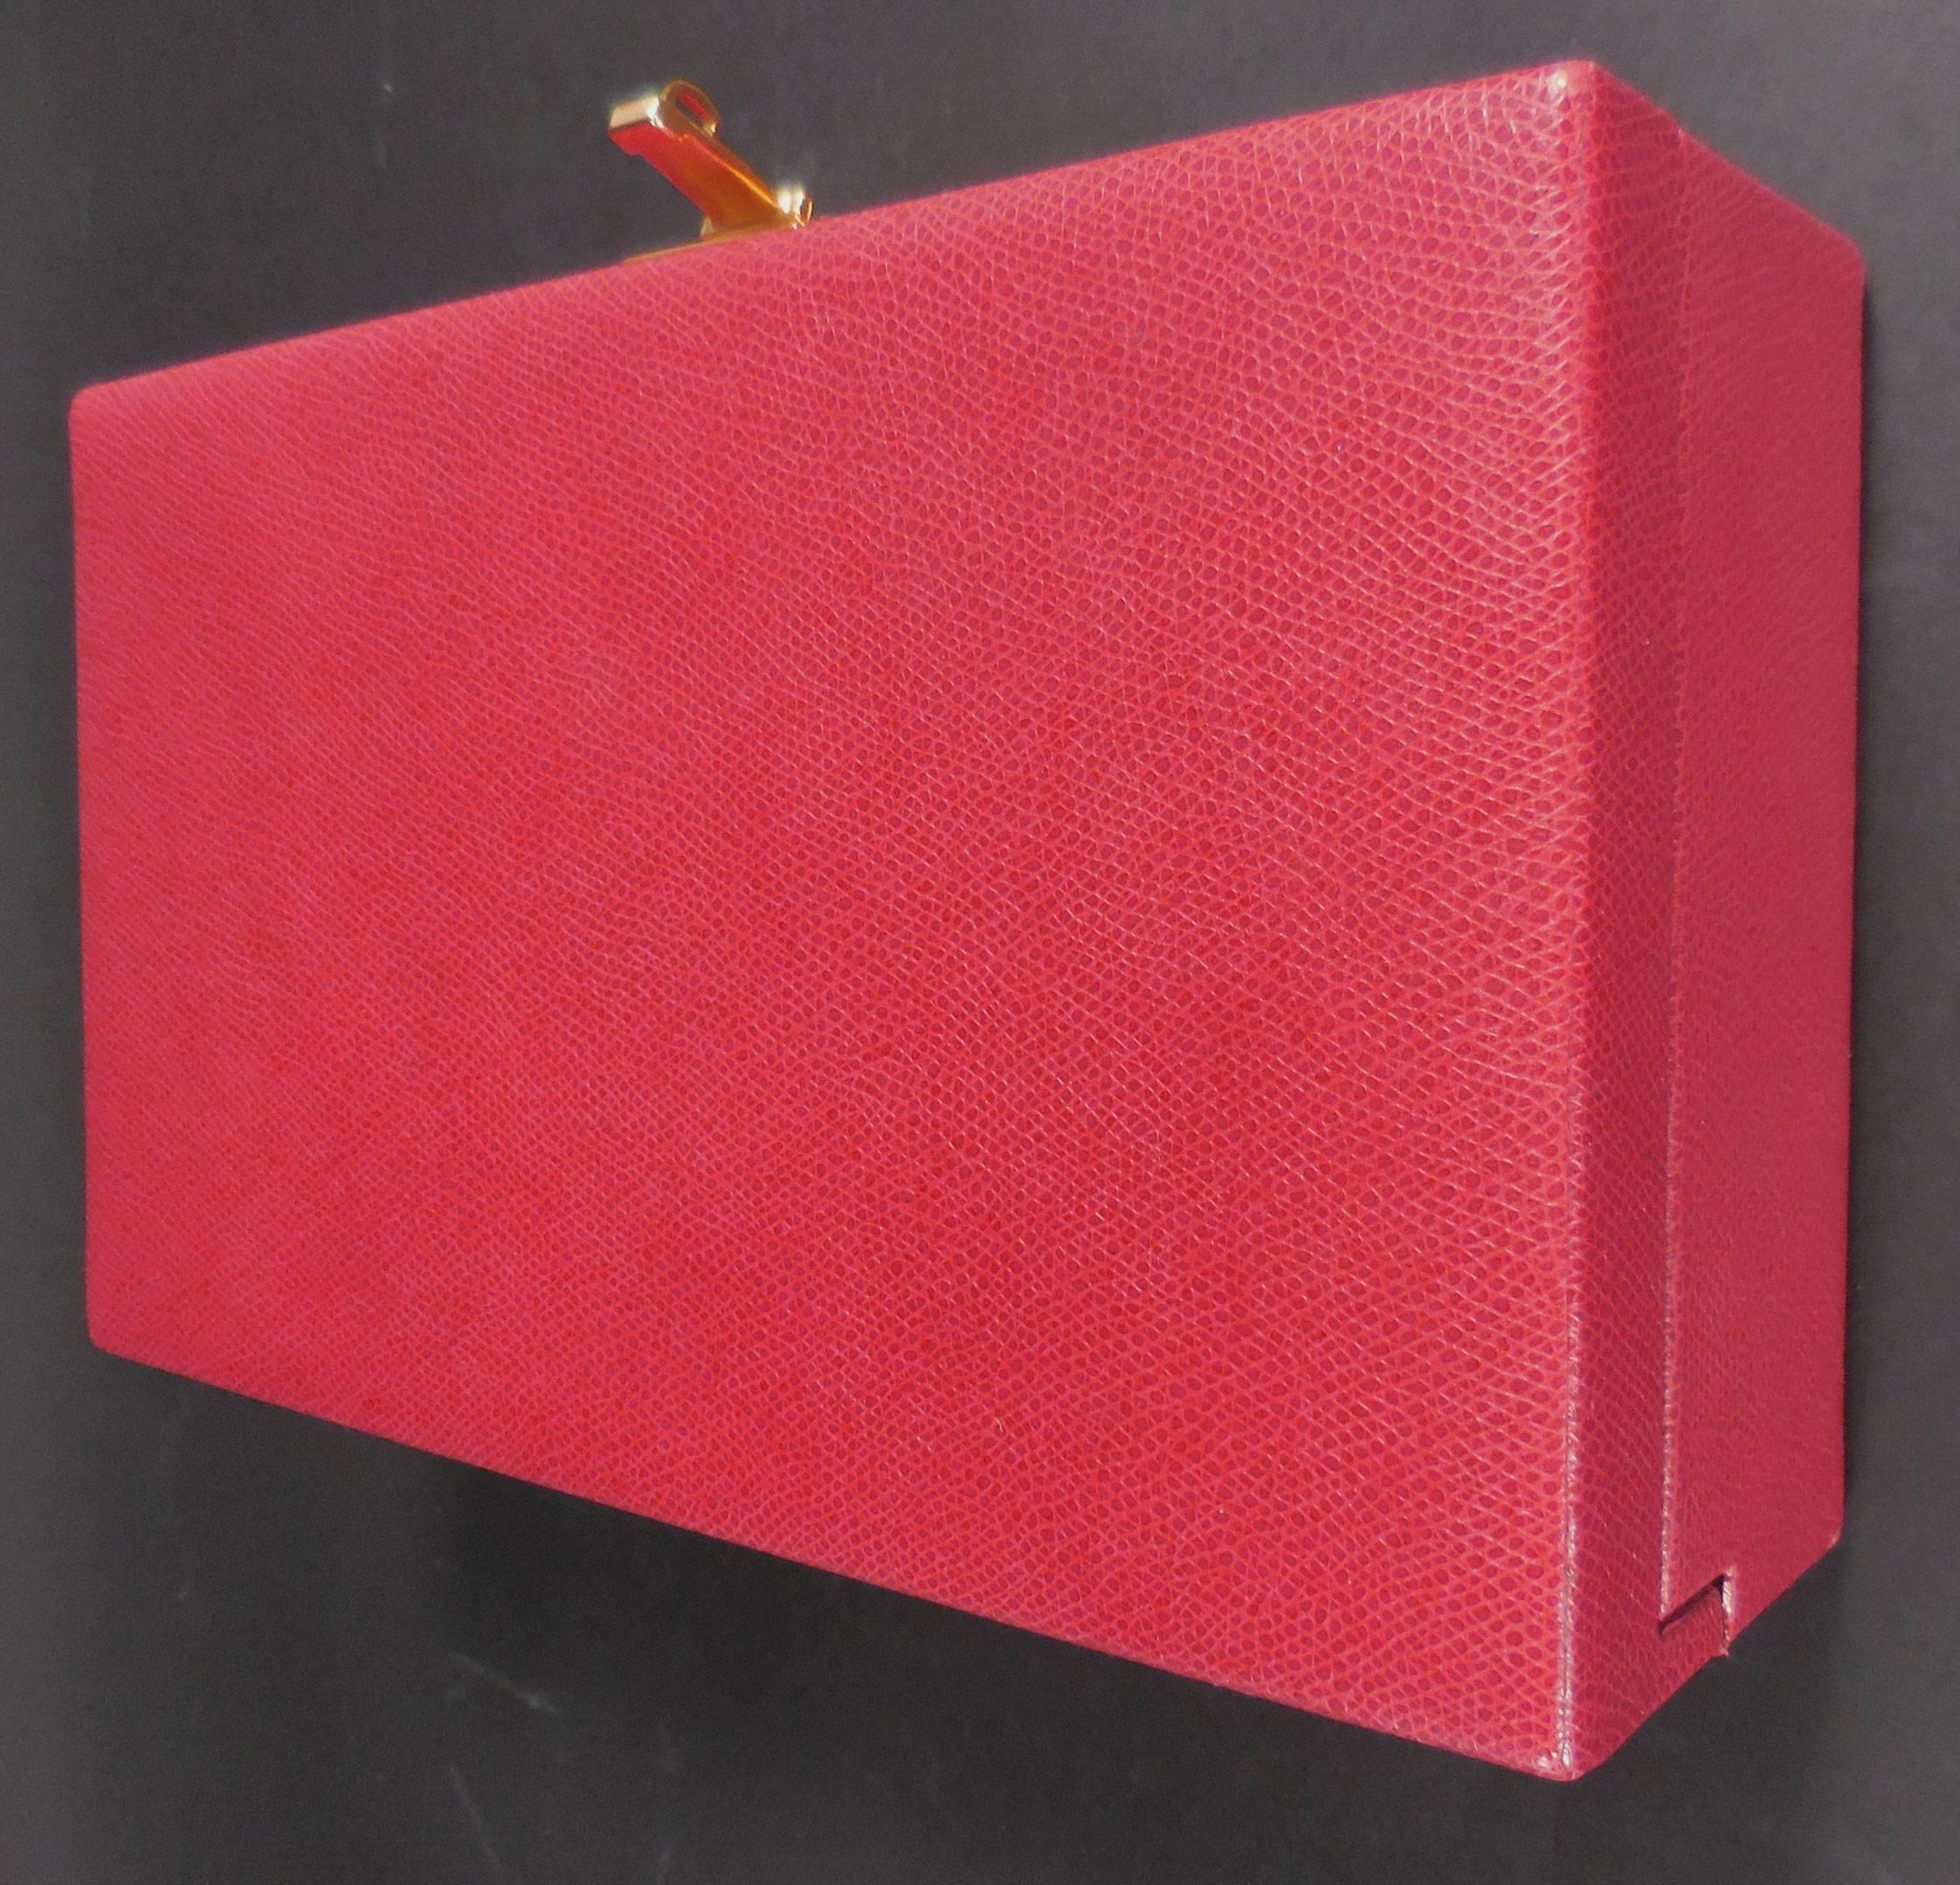 Modern Exquisite Tanner Krolle Red Leather Jewelry Case Box London, England